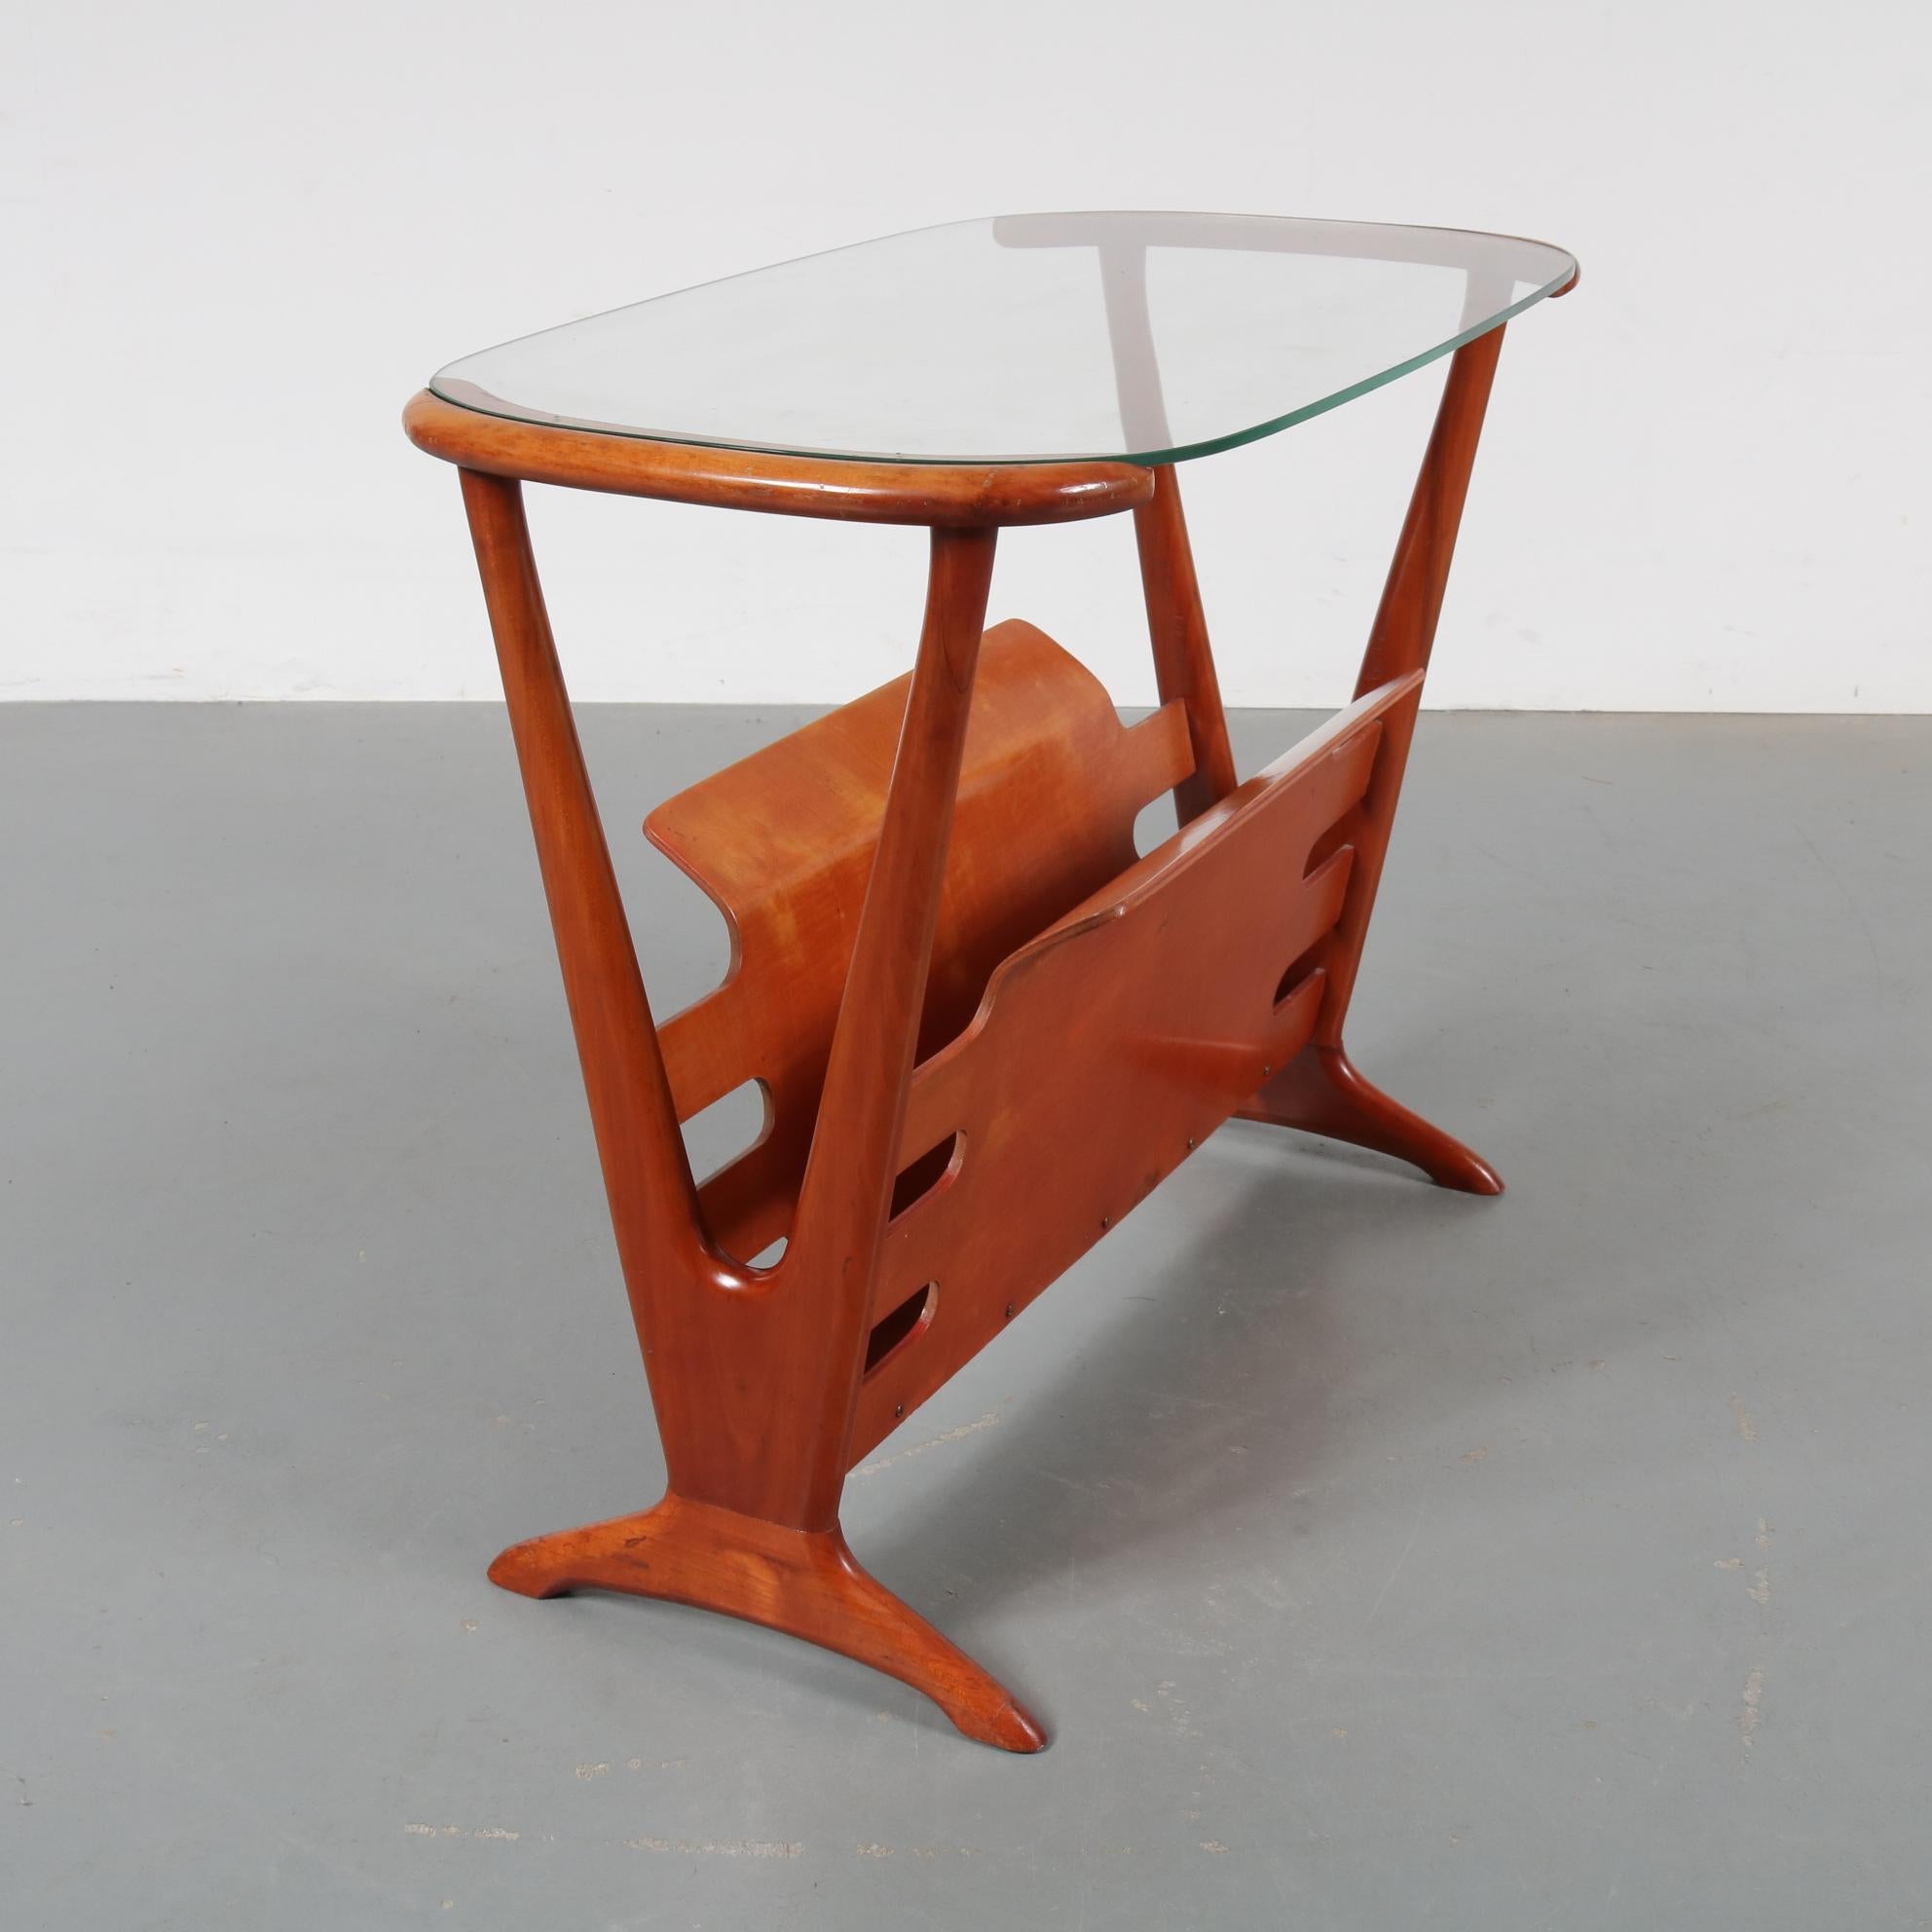 A beautiful side table in the style of Cesare Lacca, manufactured in Italy, circa 1950.

This amazing piece is made of high quality warm brown cherry wood and a clear glass top. It is beautifully crafted and has a very nice, organic shape giving